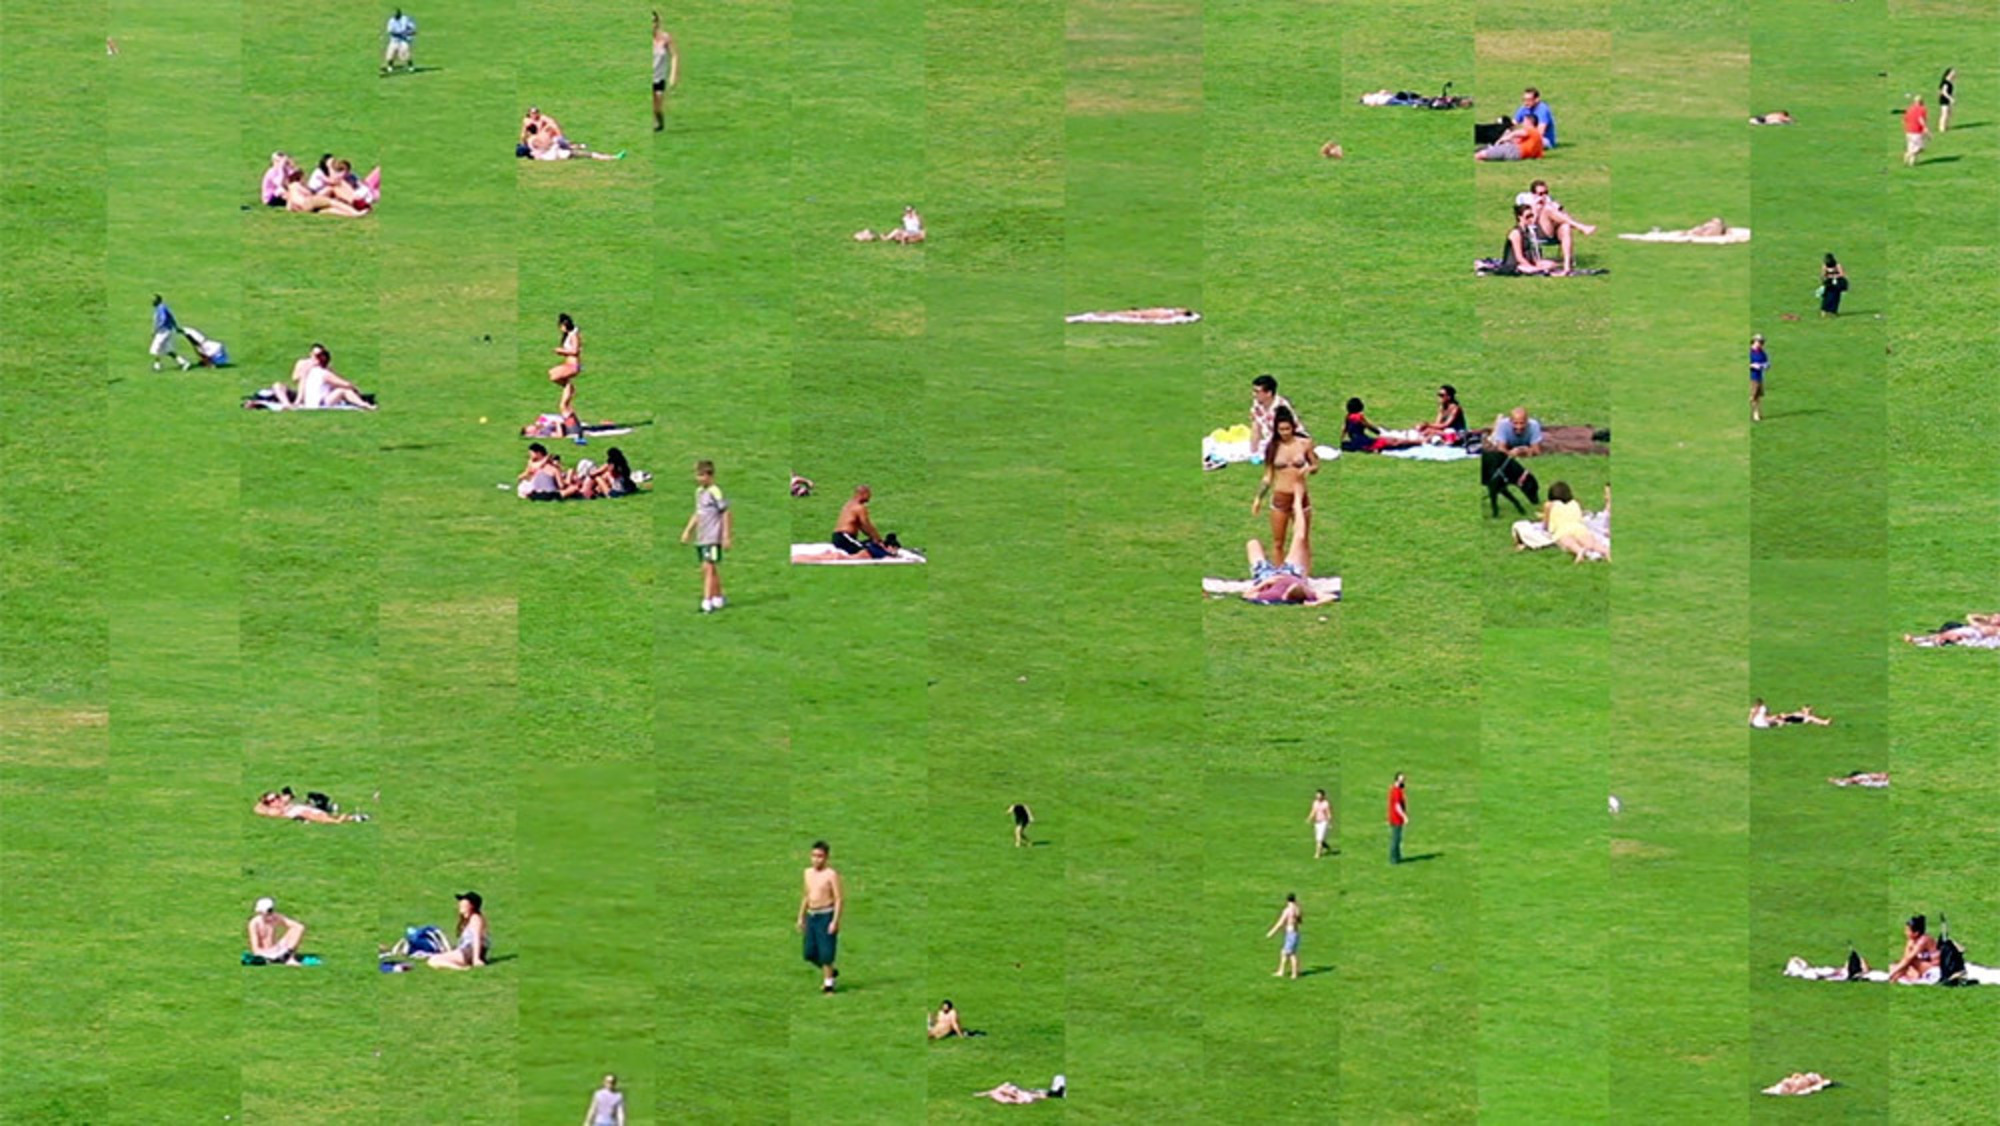 Rituals of leisure on the grass one sunny day in Central Park | Aeon ...